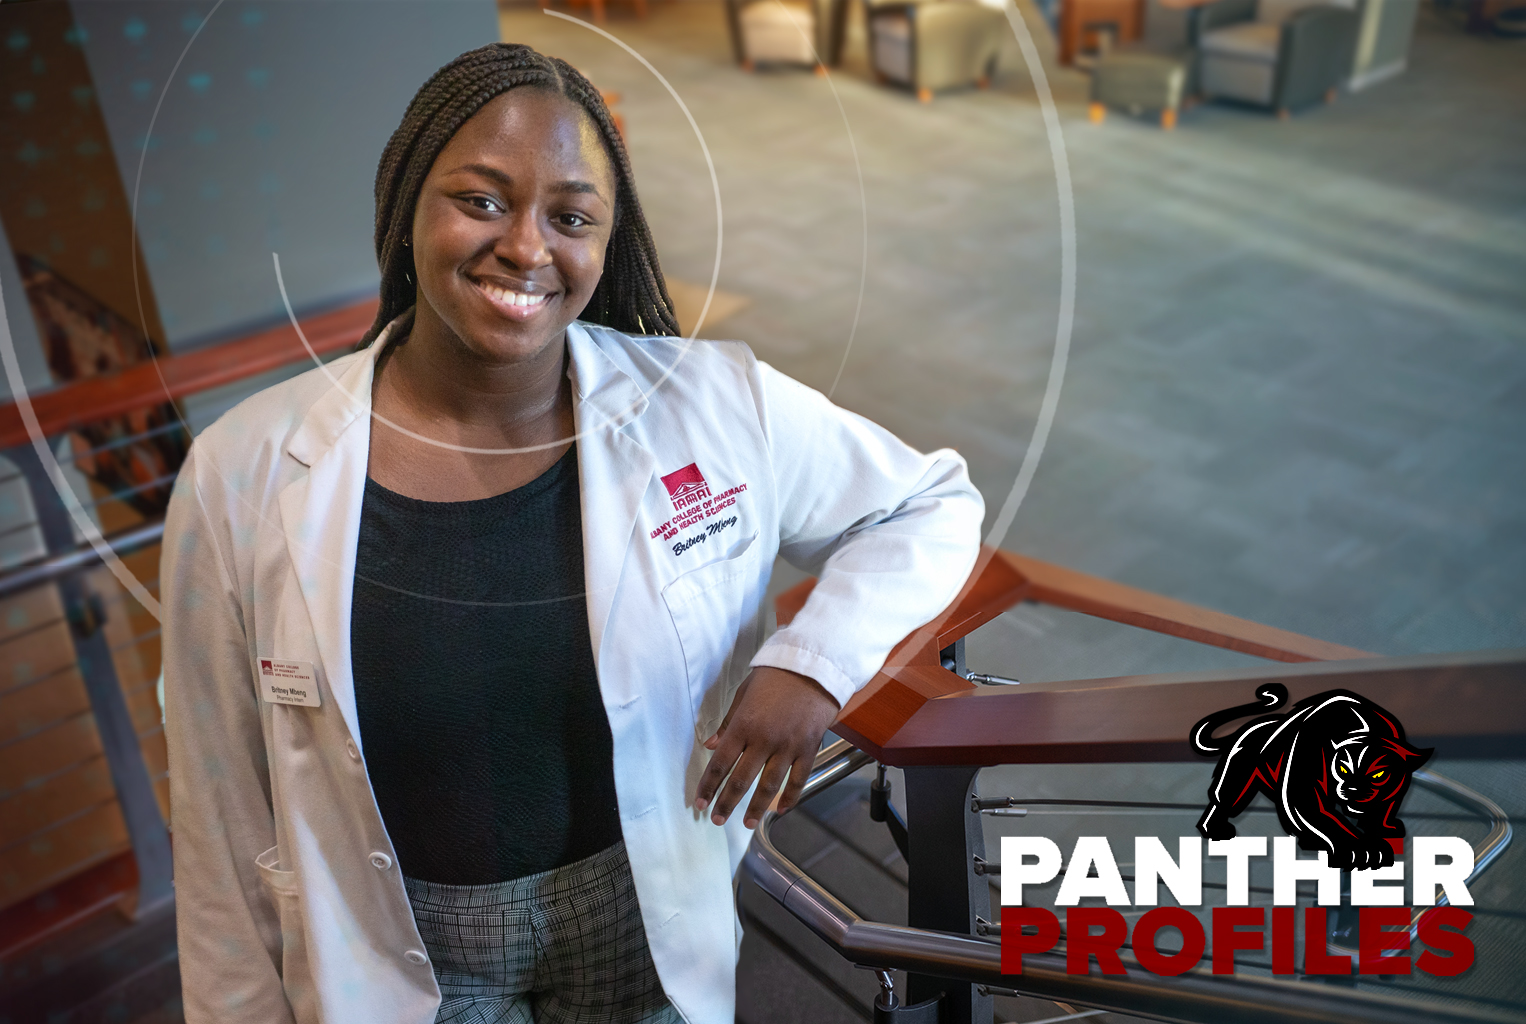 Pharmacy student Britney Mbeng '21 in a Panther Profile frame